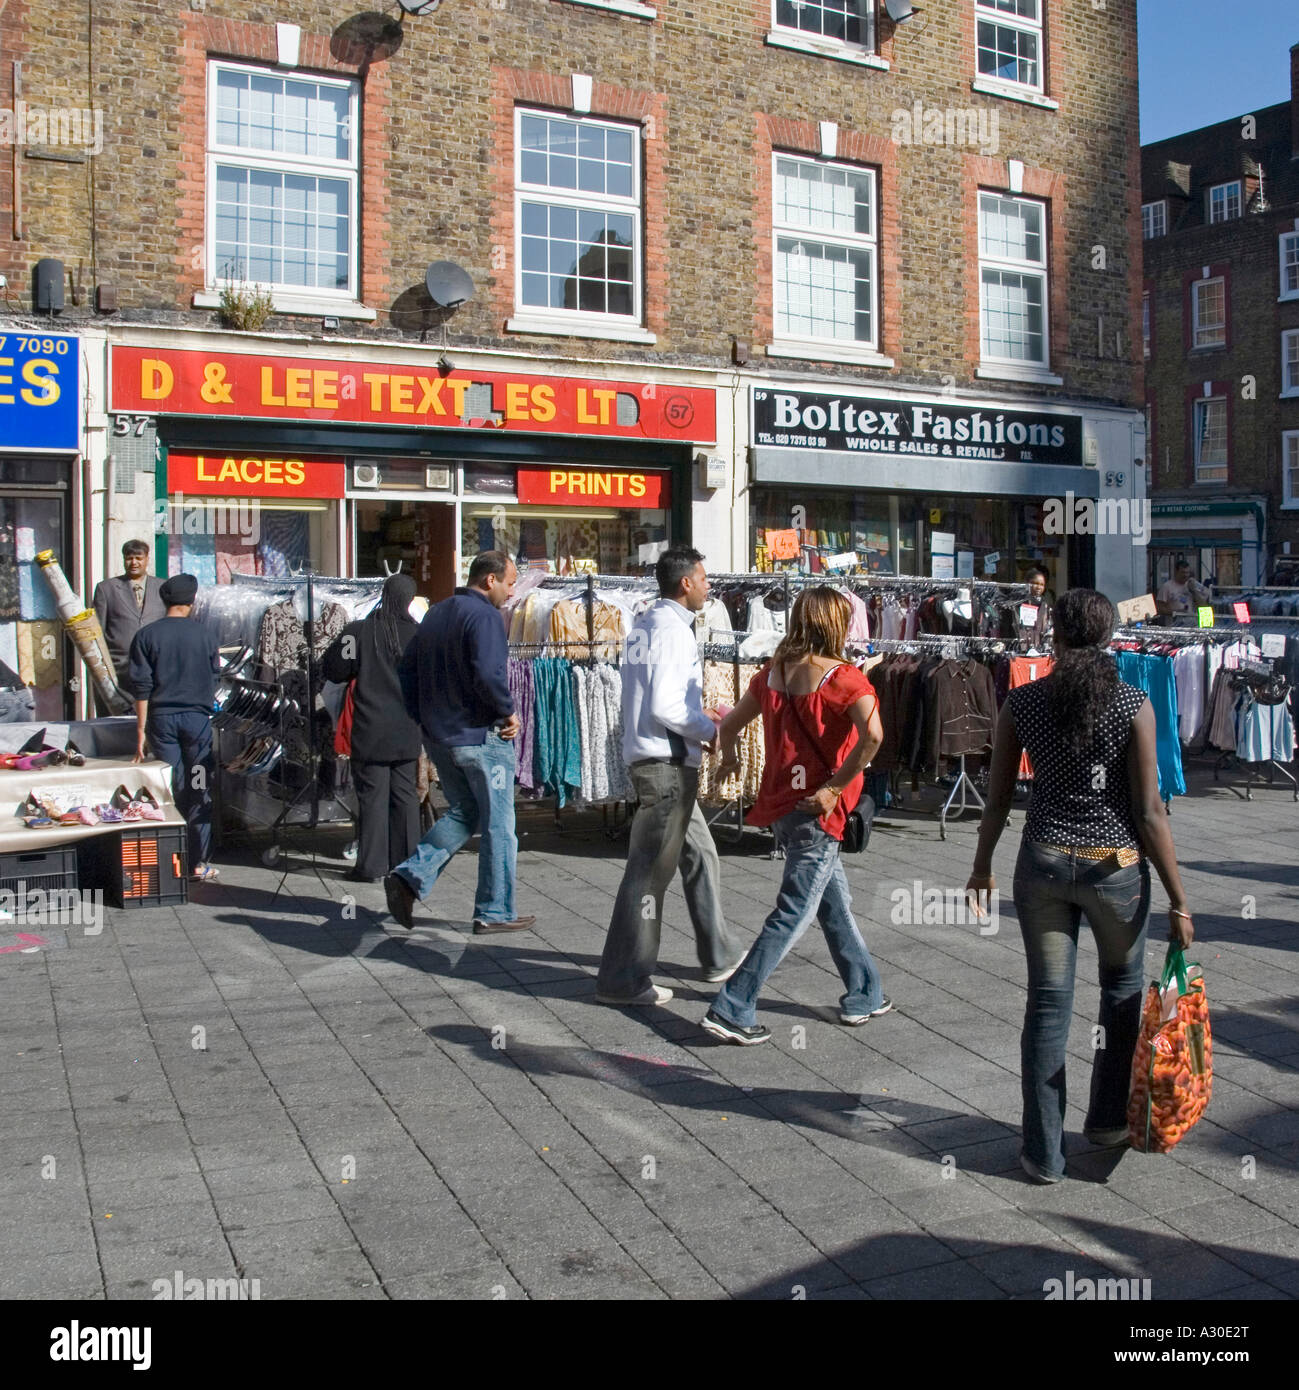 Shoppers in Wentworth Street part of Petticoat Lane Market with  clothing rails outdoors on pavement in front of retail business shop front London UK Stock Photo